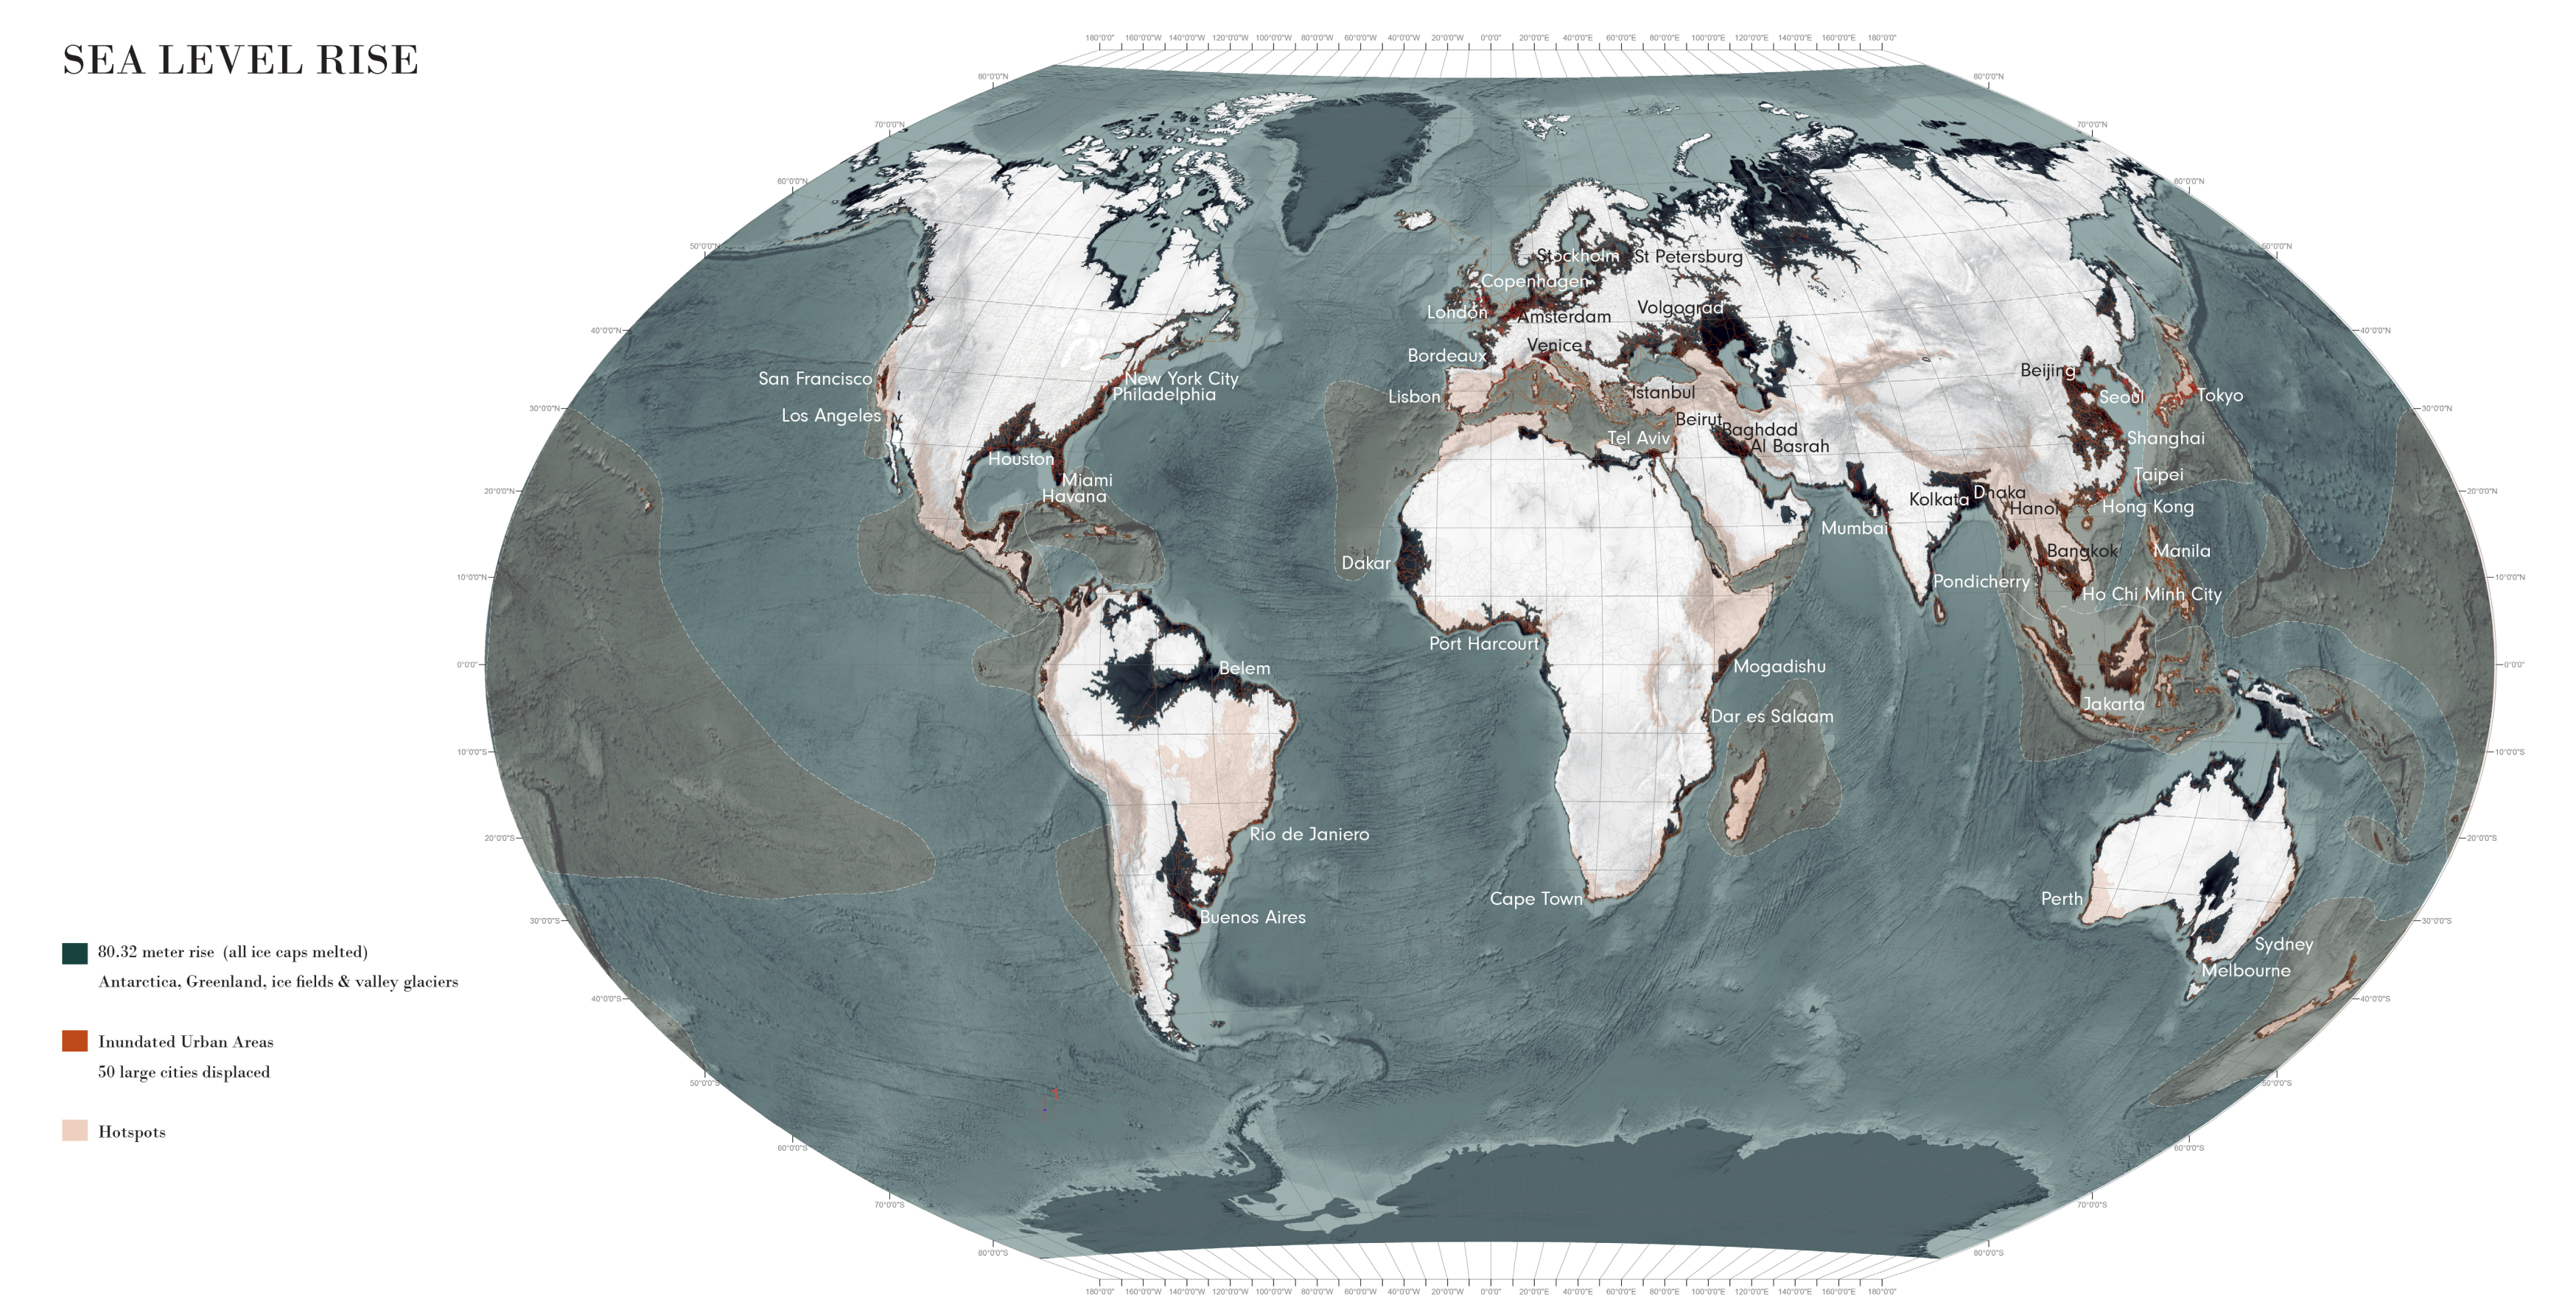 A map of land remaining after an 80-metre sea level rise